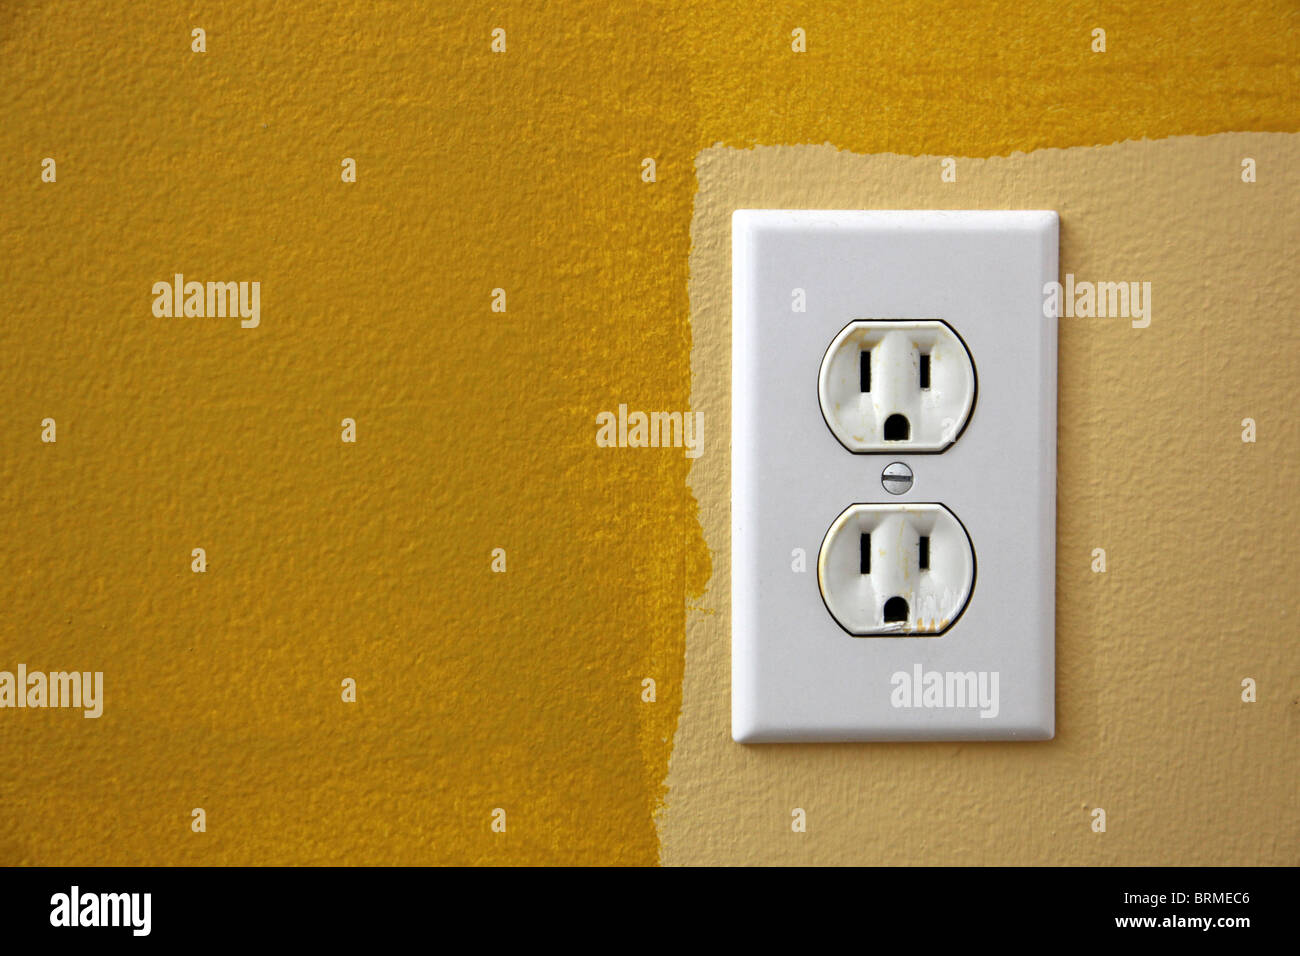 US plug in the wall with yellow paint around it. Stock Photo